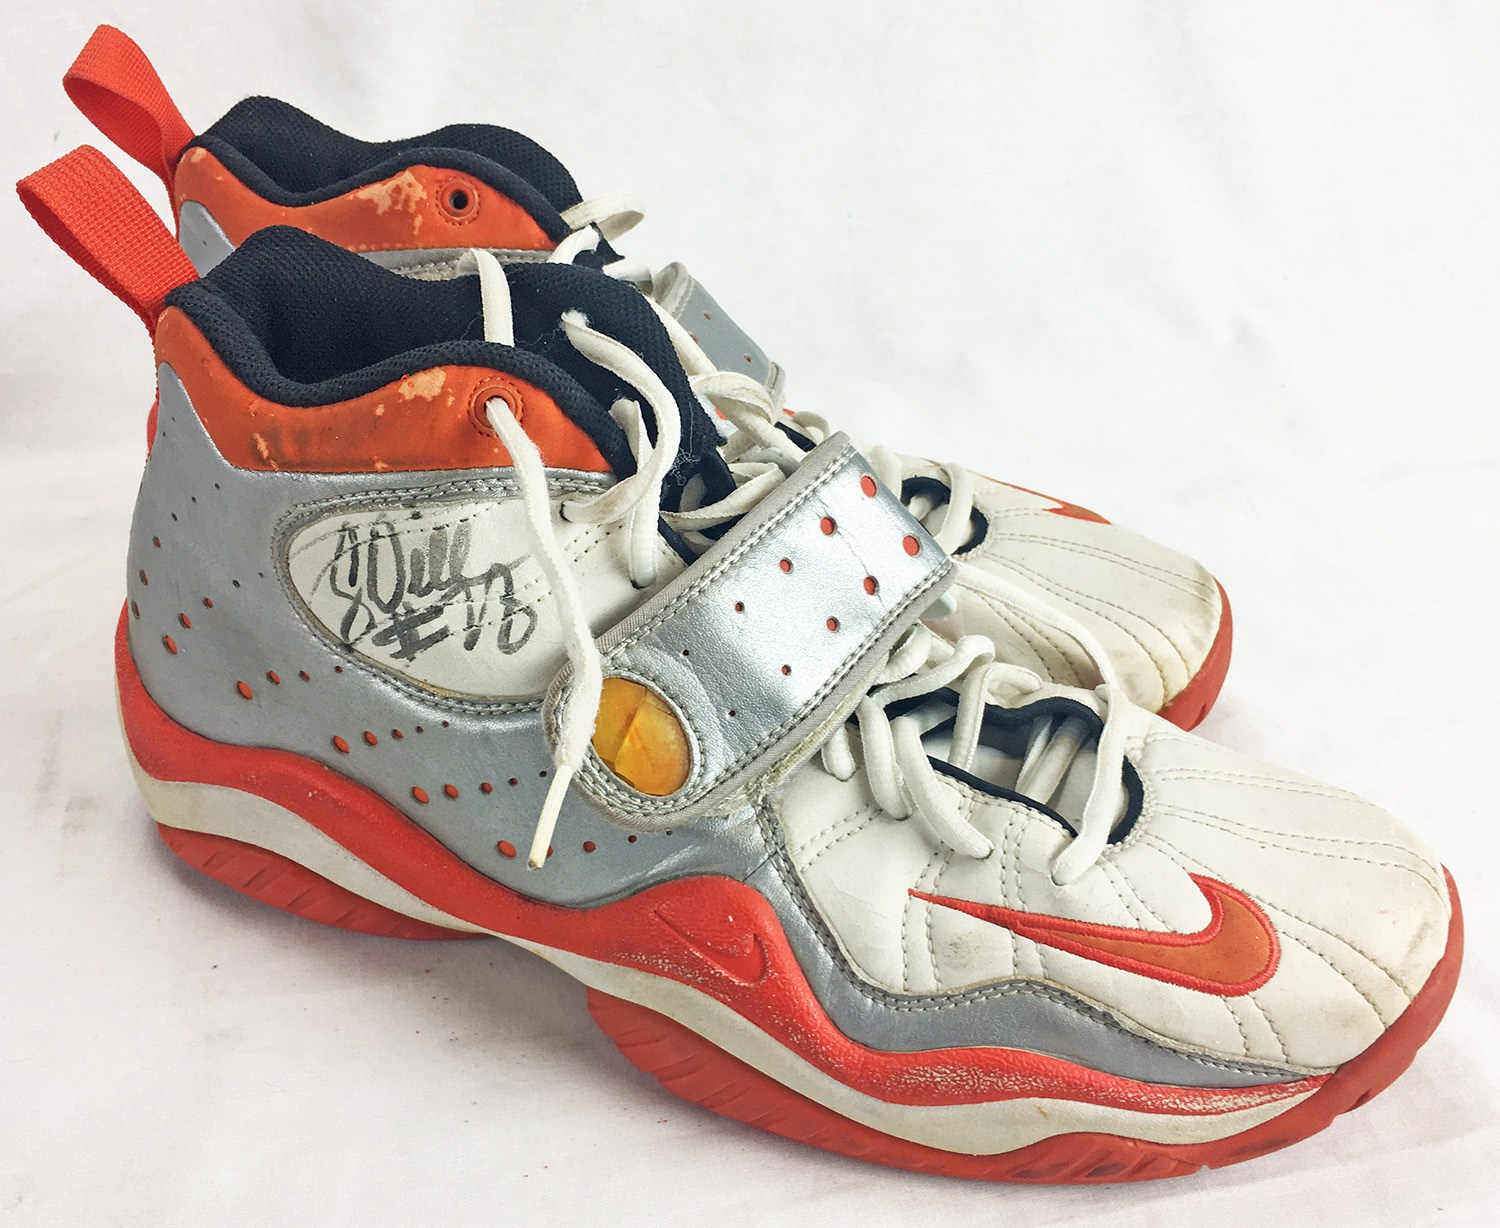 Corey Dillon Signed Game Worn Cleats